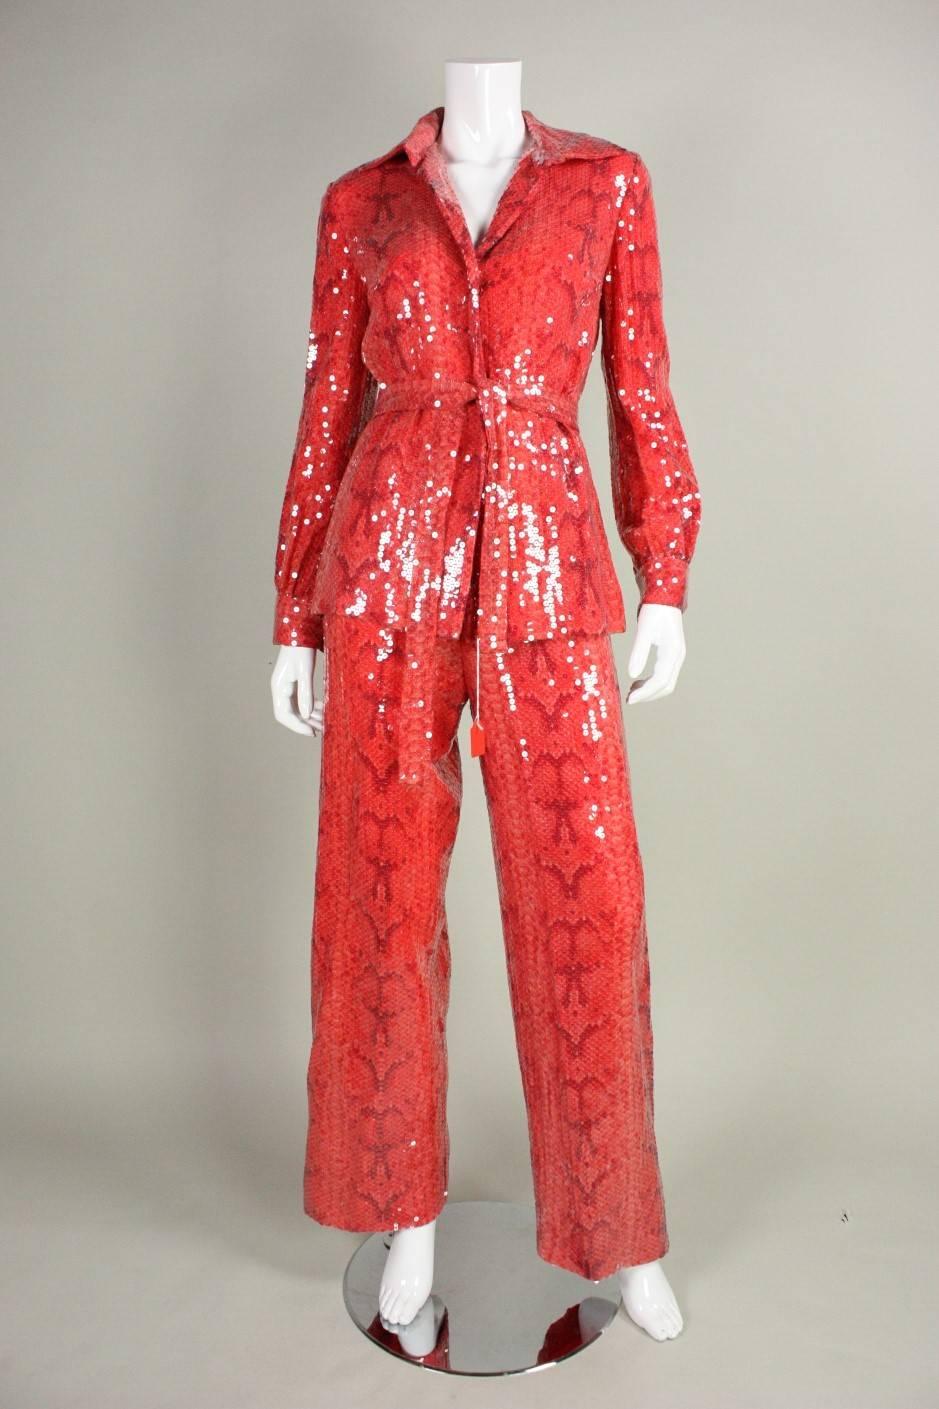 Glamorous ensemble from Bill Blass is made of red silk with a snakeskin print.  Ensemble is entirely covered with clear sequins. Blouse has hidden snap closure down the center front, turn-down collar, and long sleeves with snap cuffs.